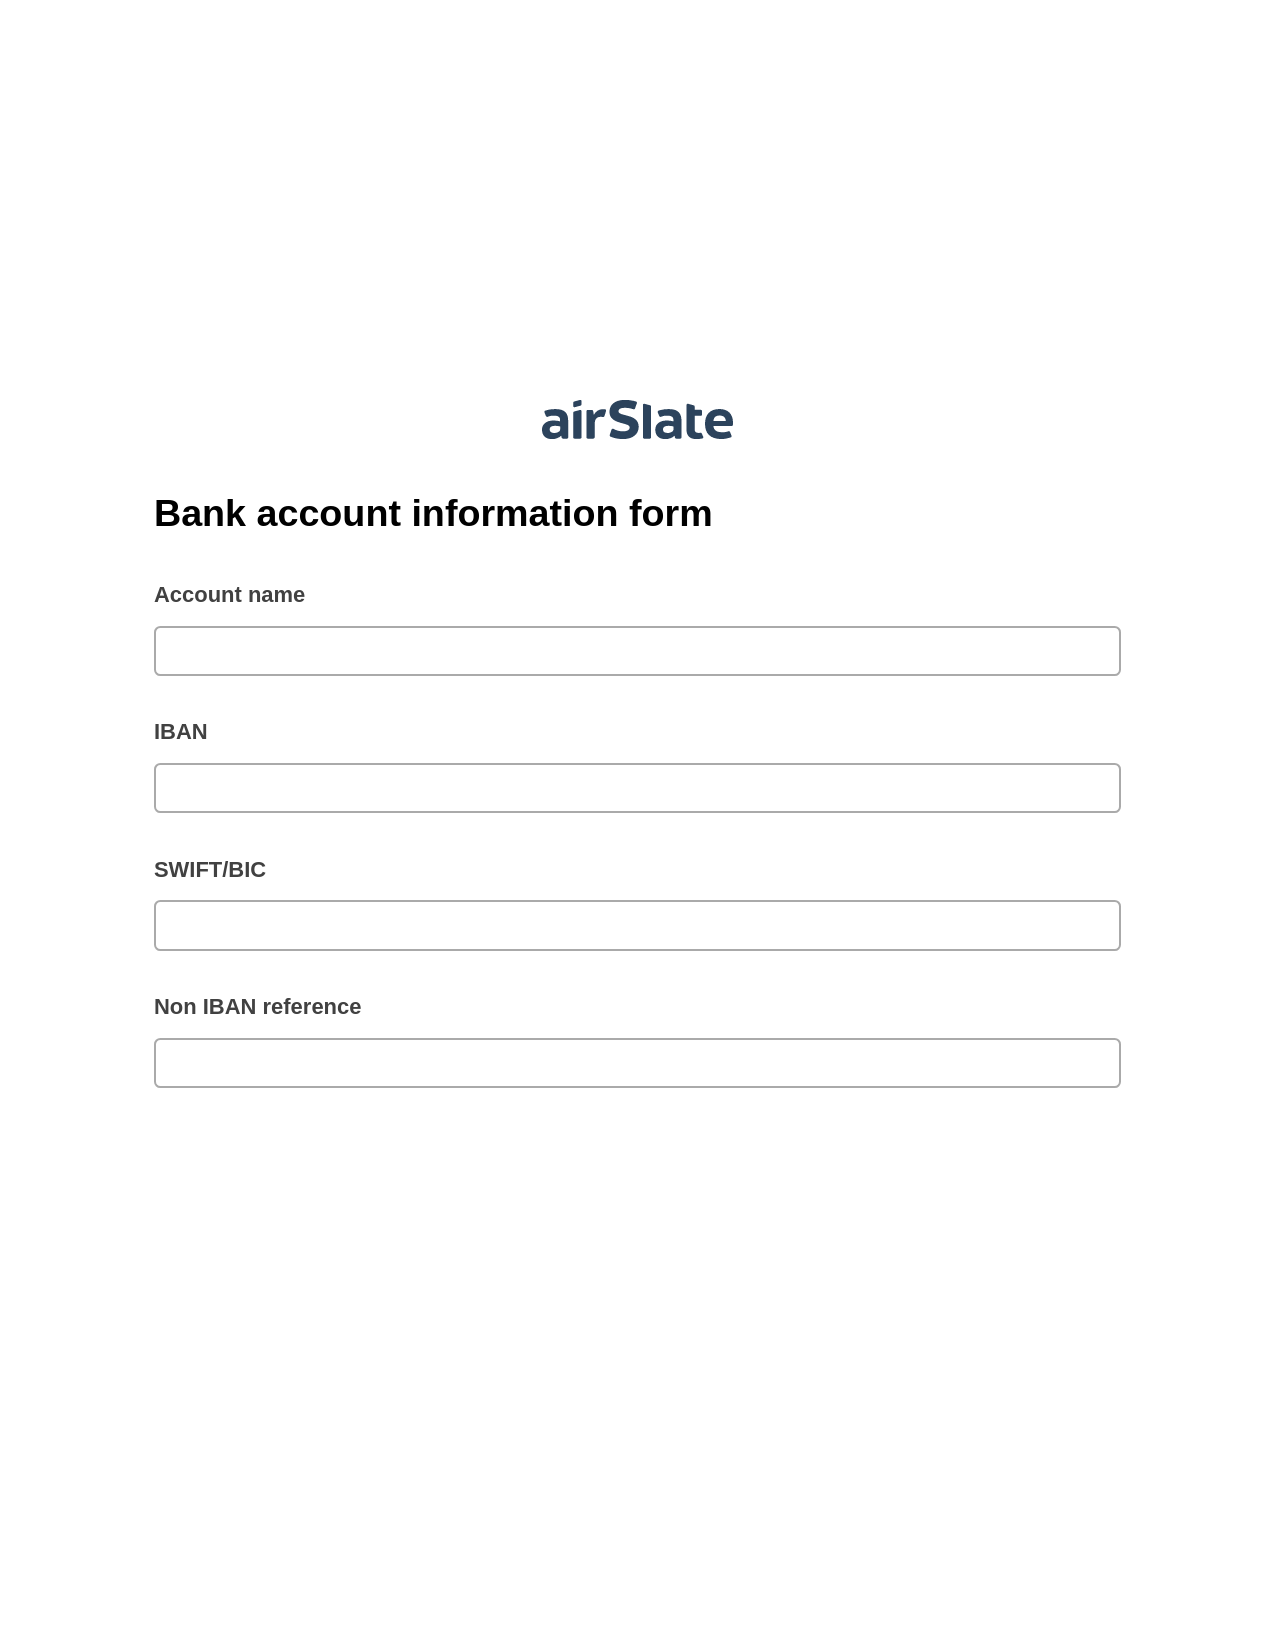 Multirole Bank account information form Pre-fill from CSV File Dropdown Options Bot, Slack Notification Bot, Slack Notification Postfinish Bot